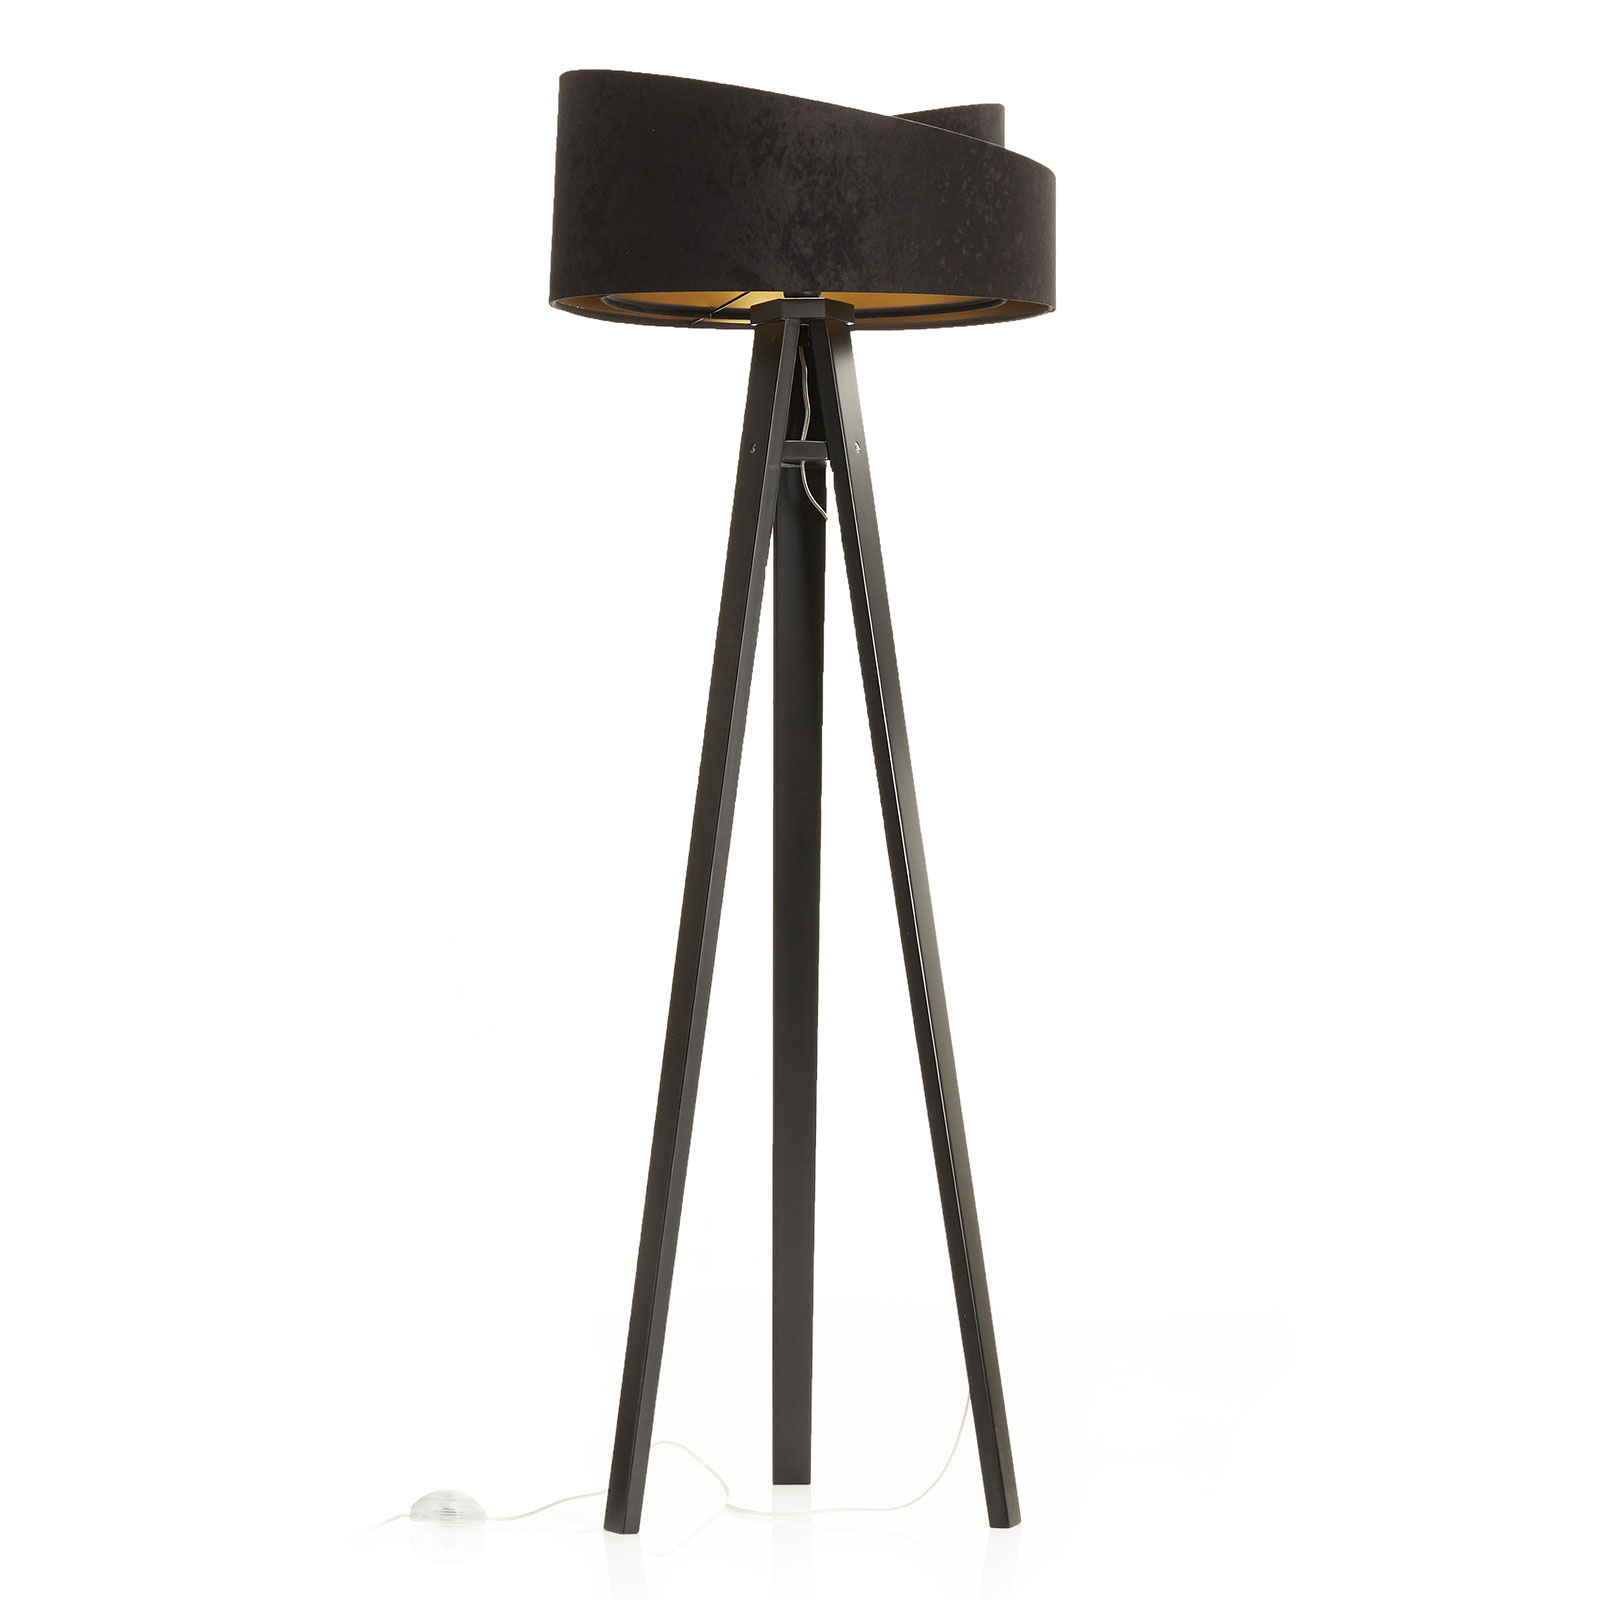 Emi tripod floor lamp with a 2-coloured lampshade